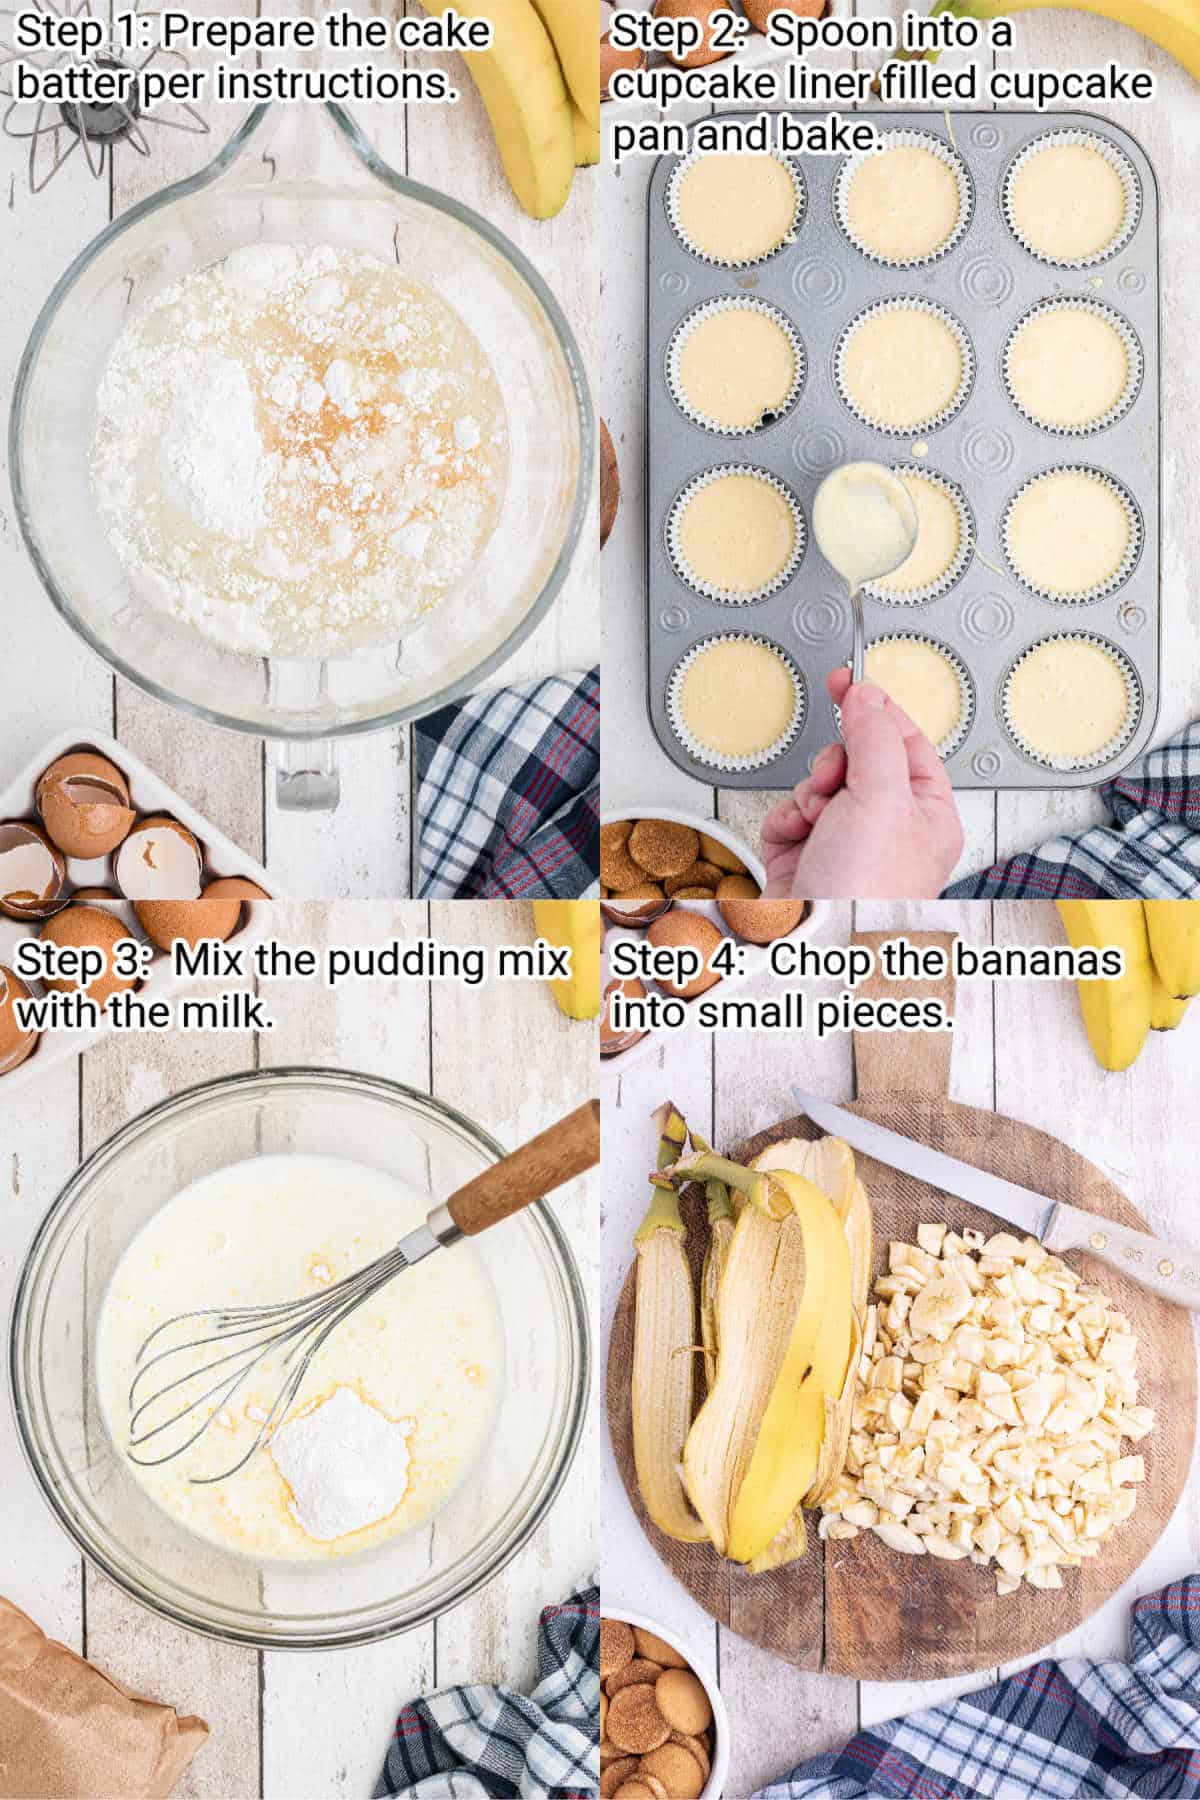 four images showing the recipe steps for making banana pudding cupcakes